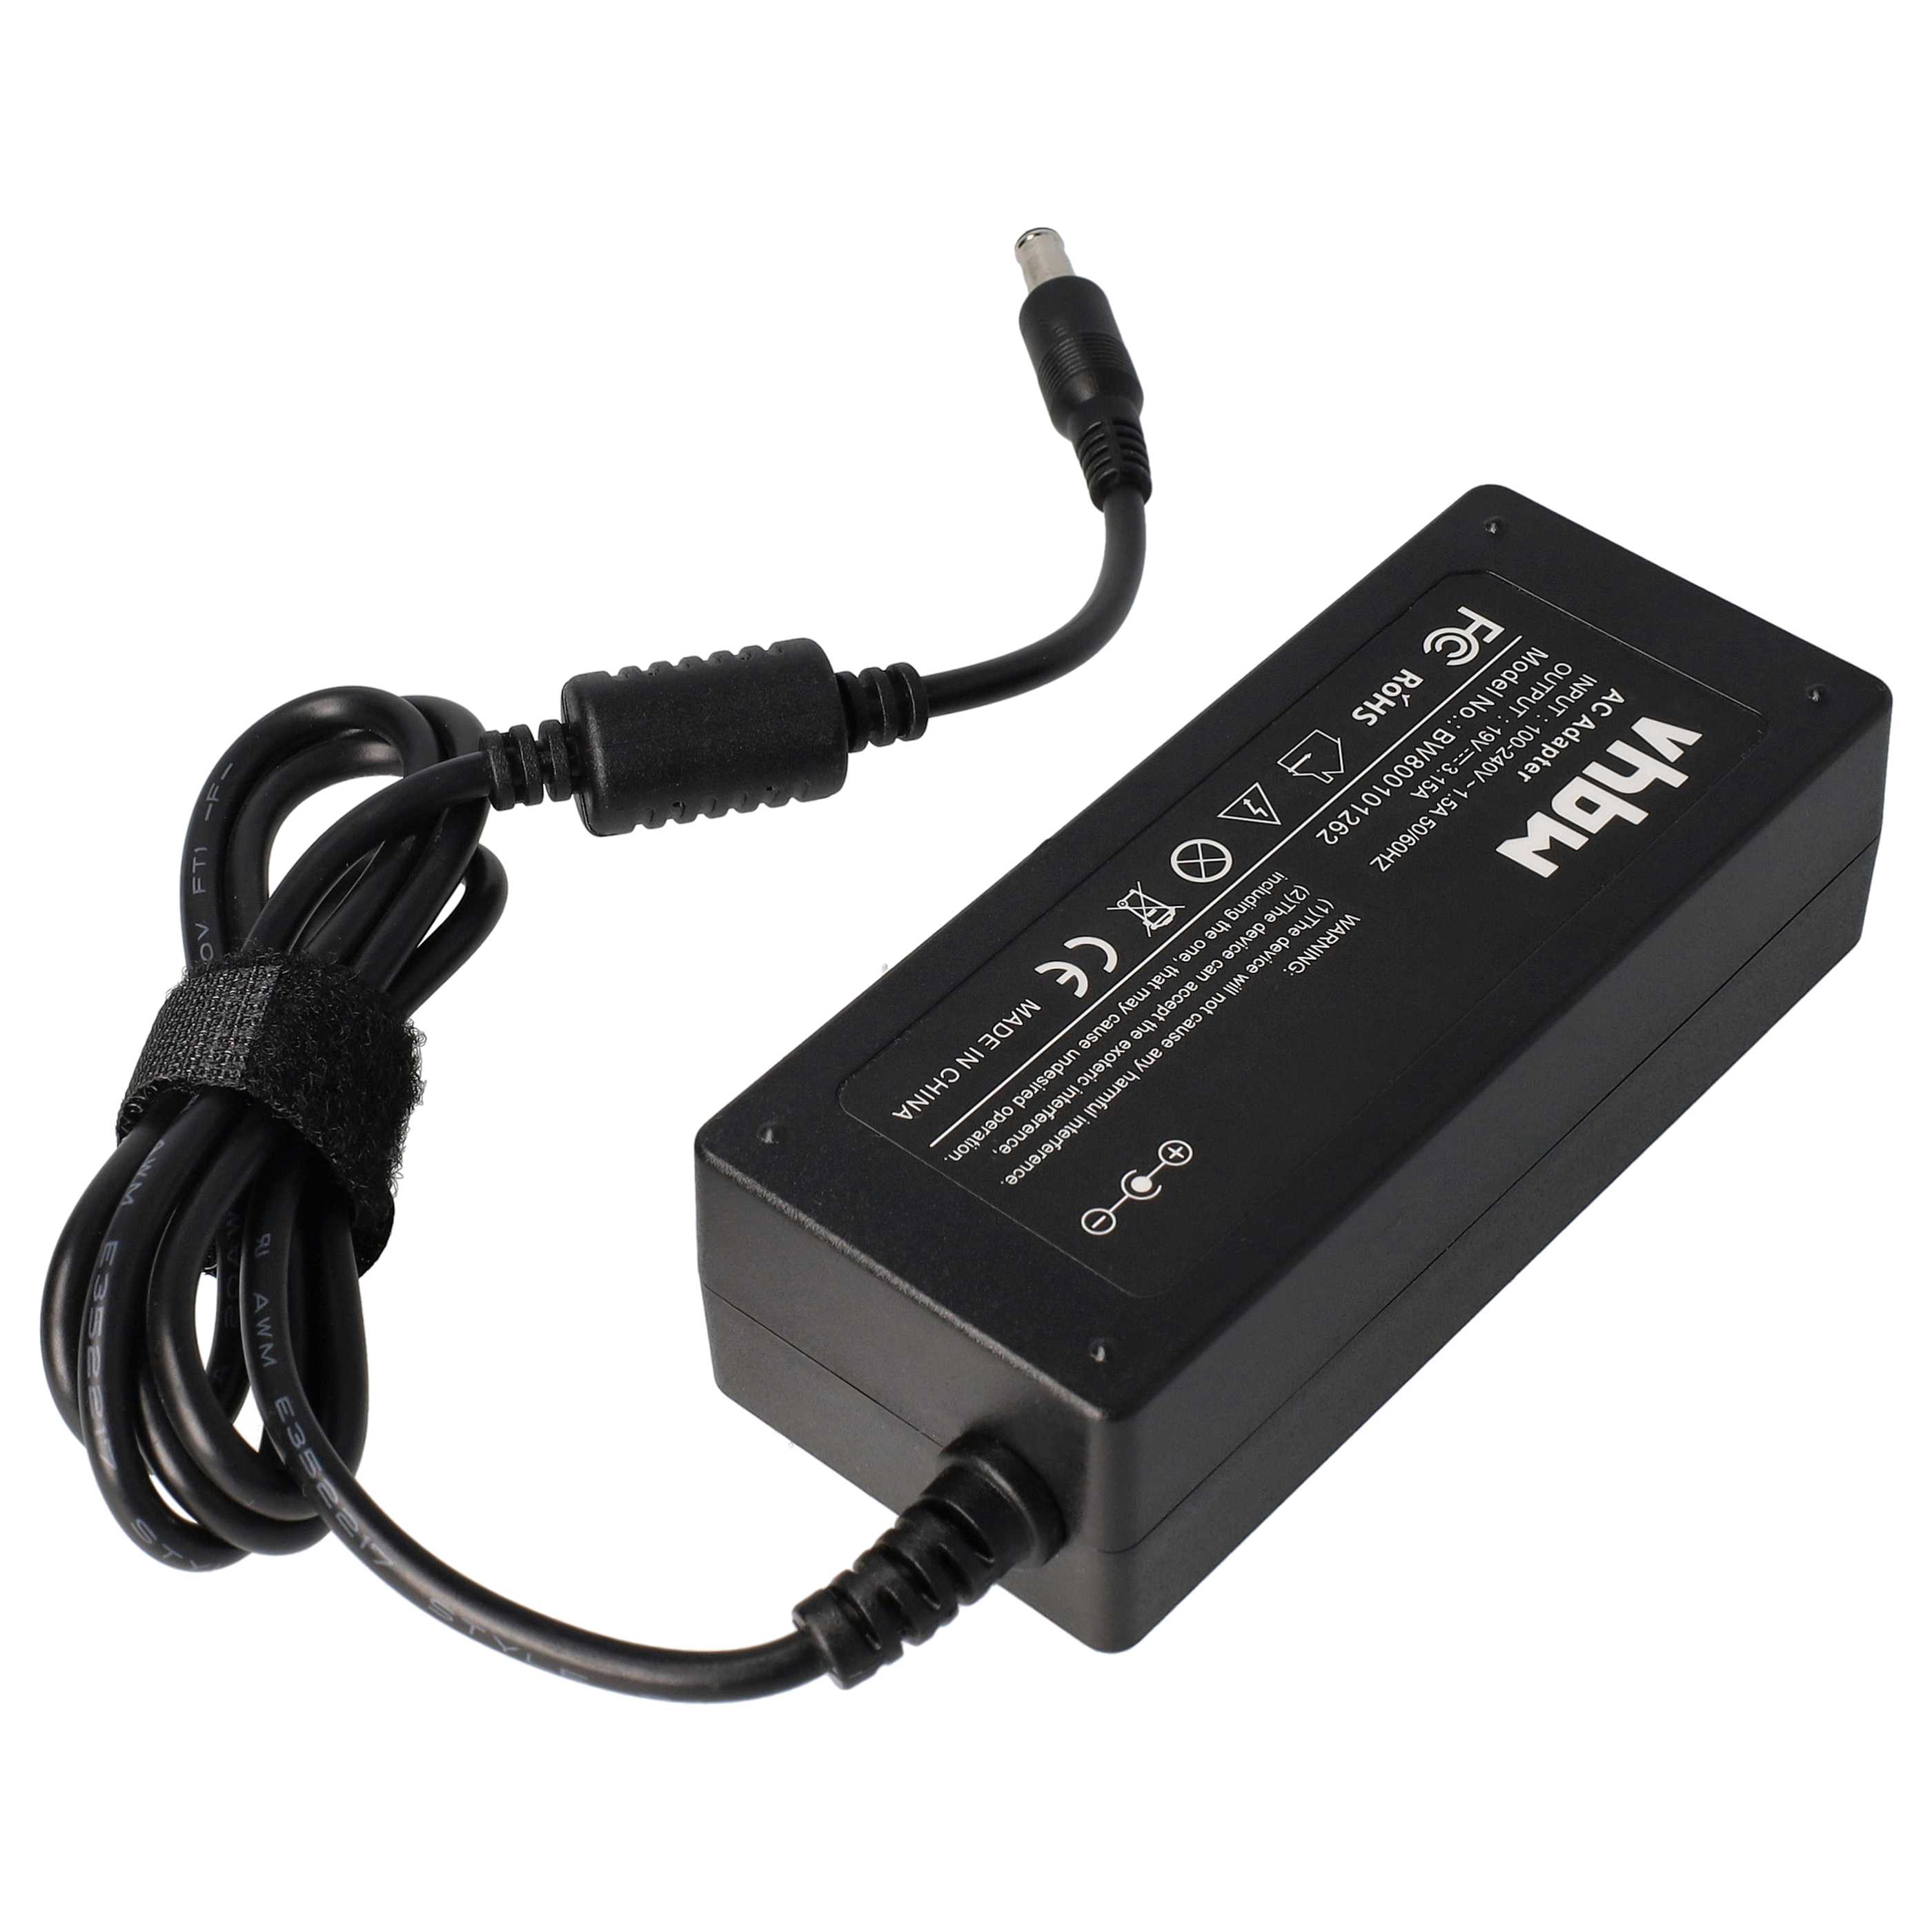 Mains Power Adapter replaces Samsung AD-6019(V), AD-6019, PSCV600104A, AD-6019A for SamsungNotebook, 60 W